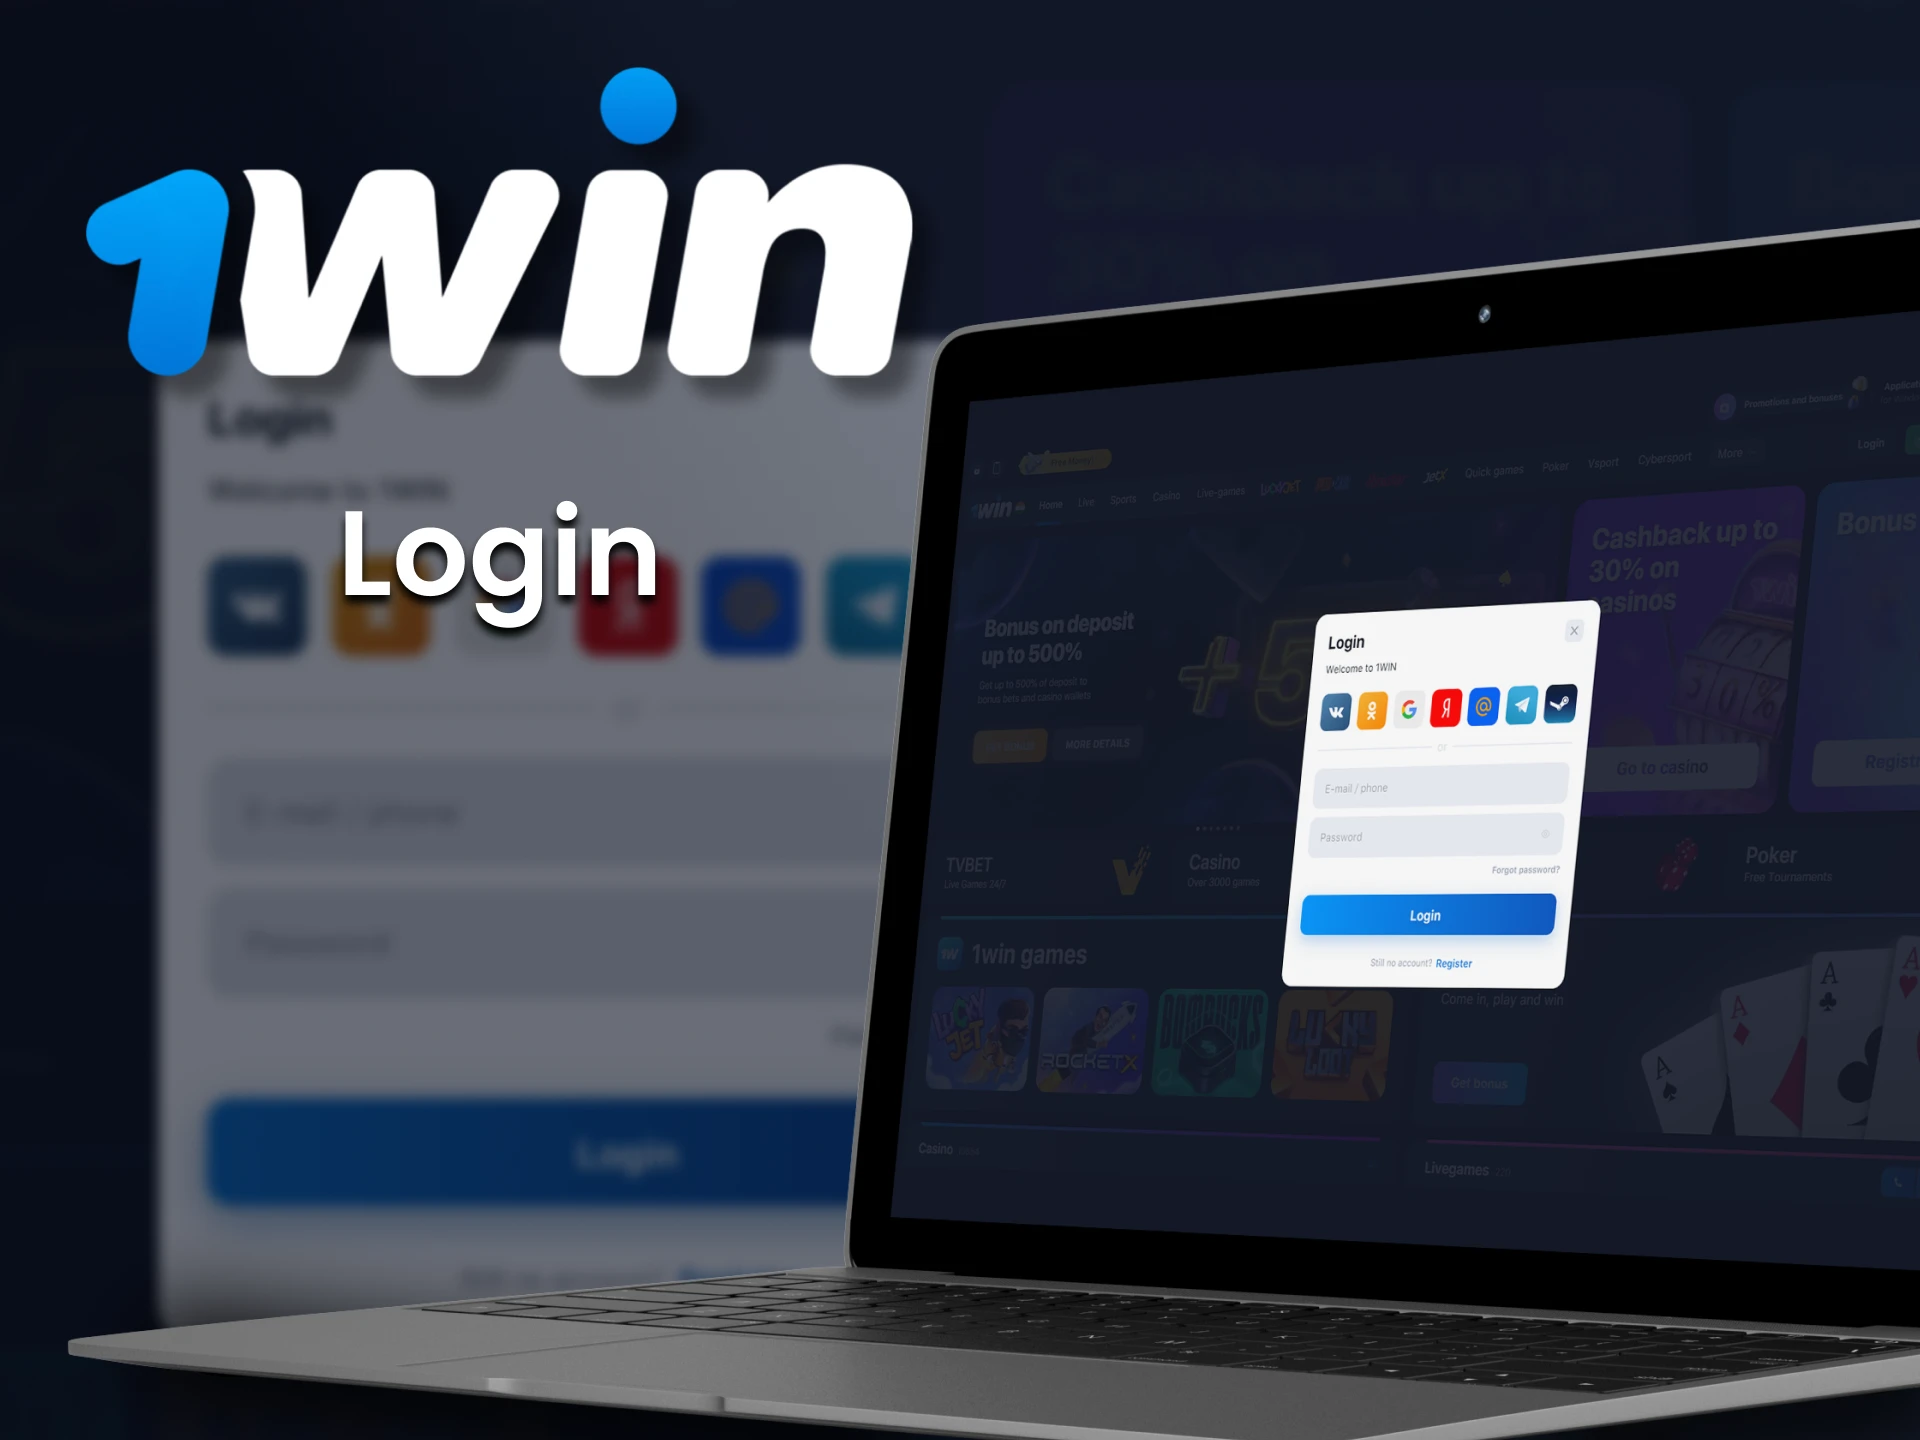 Log in to your personal 1win account for betting and gambling.